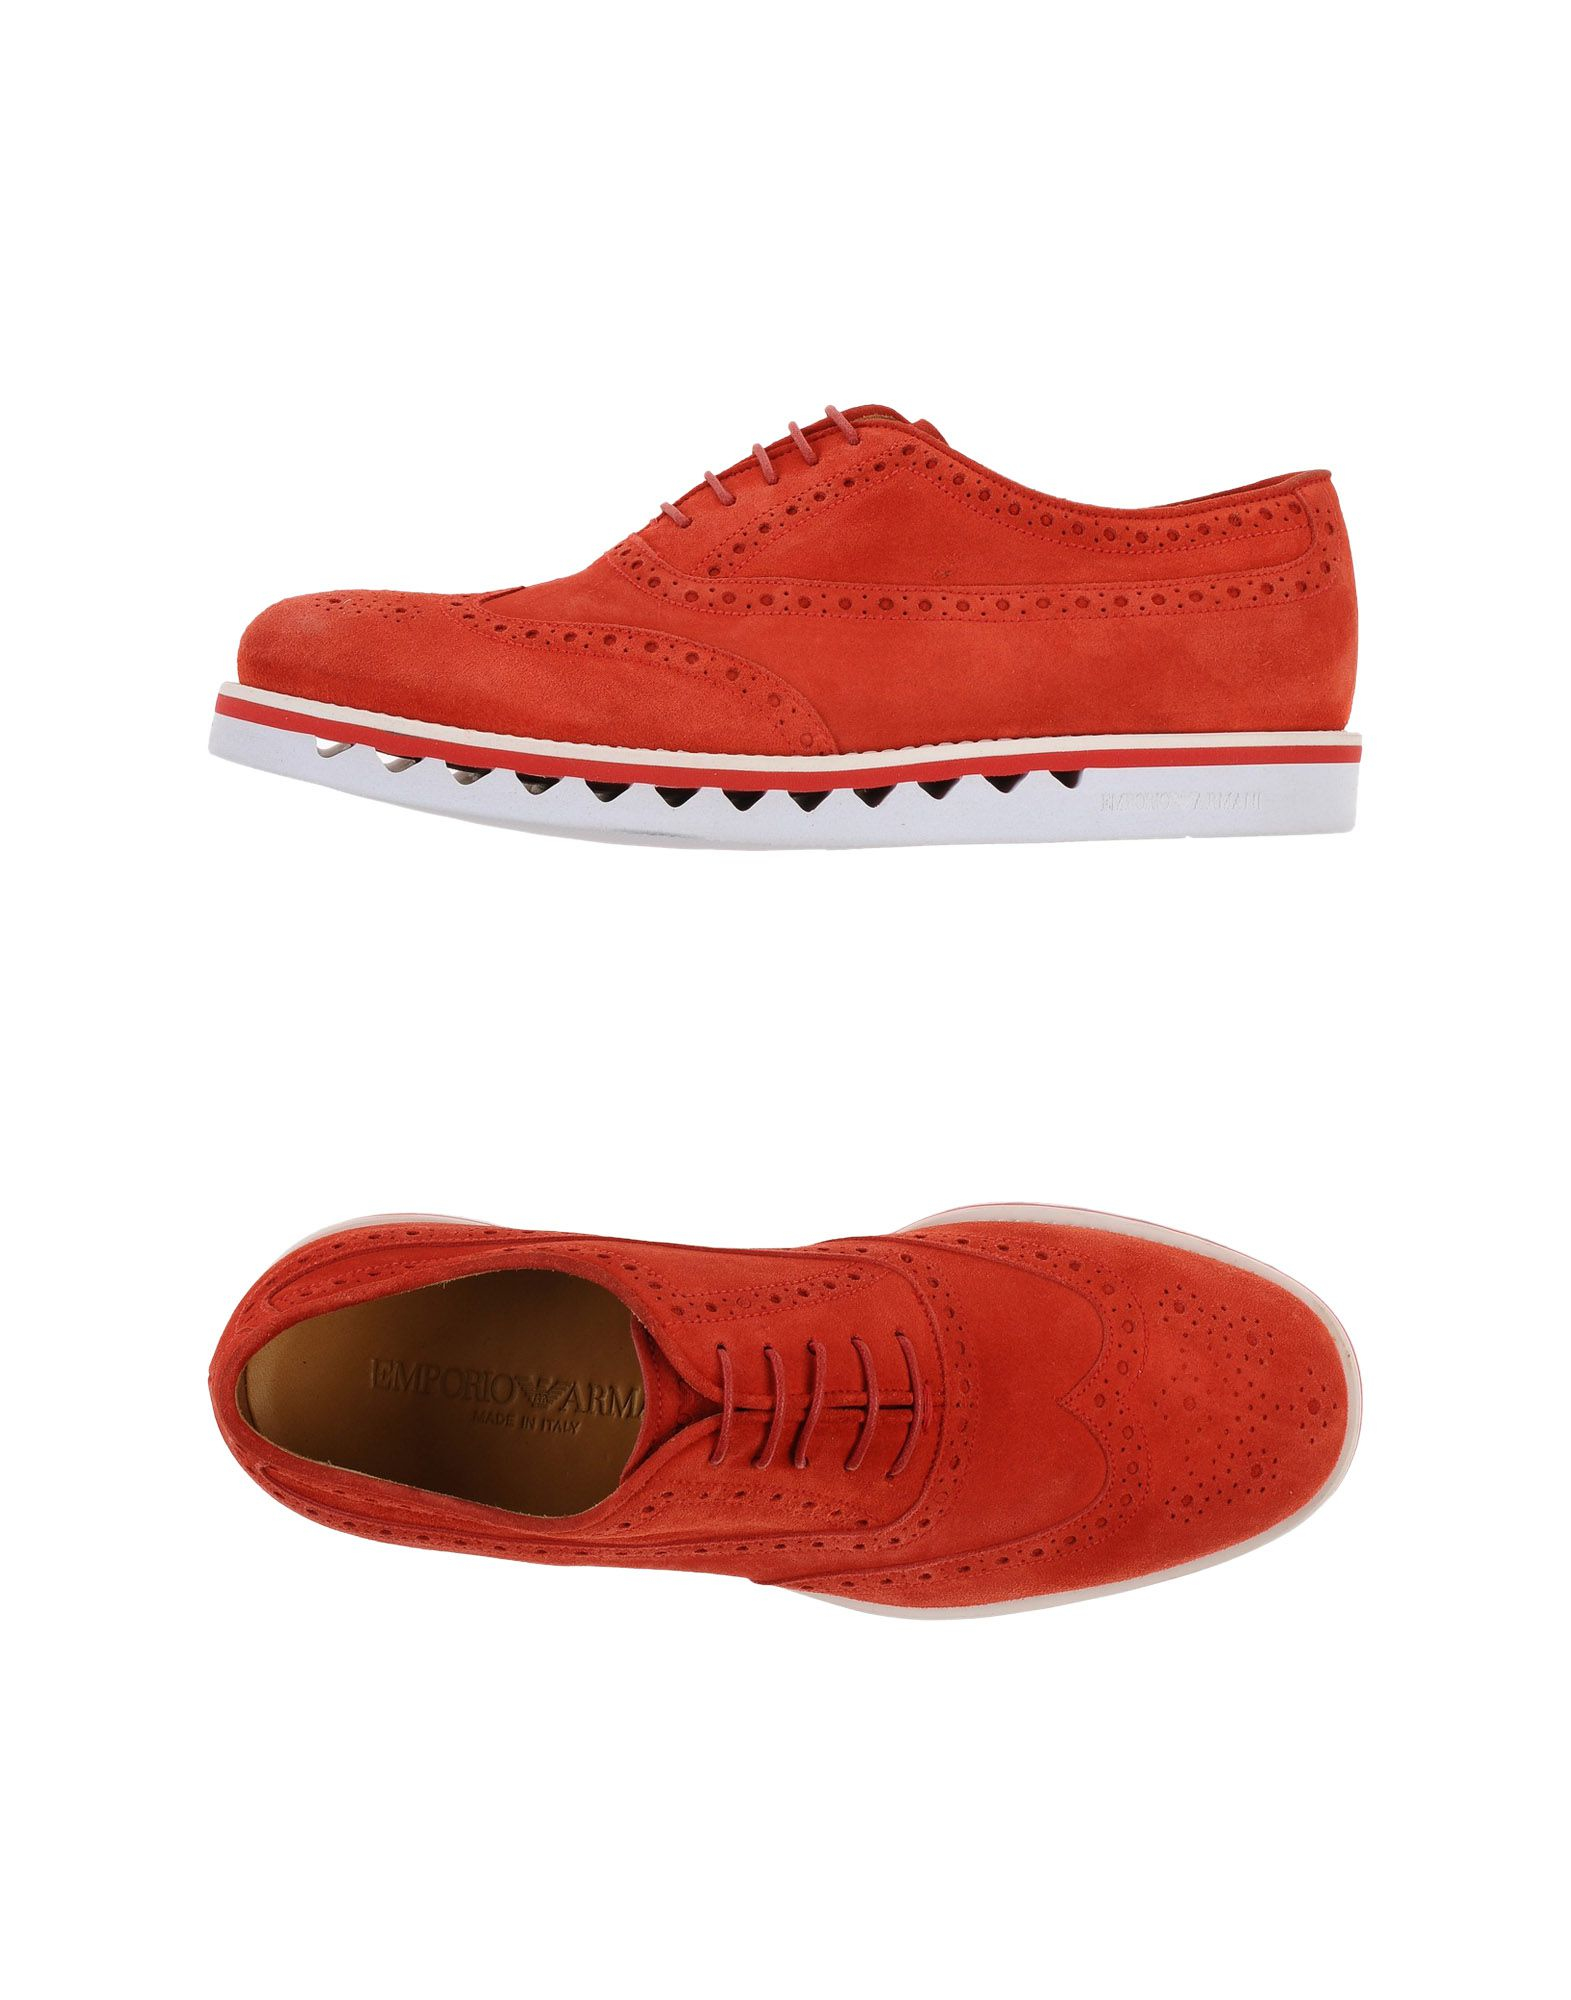 Lyst - Emporio Armani Lace-up Shoes in Red for Men